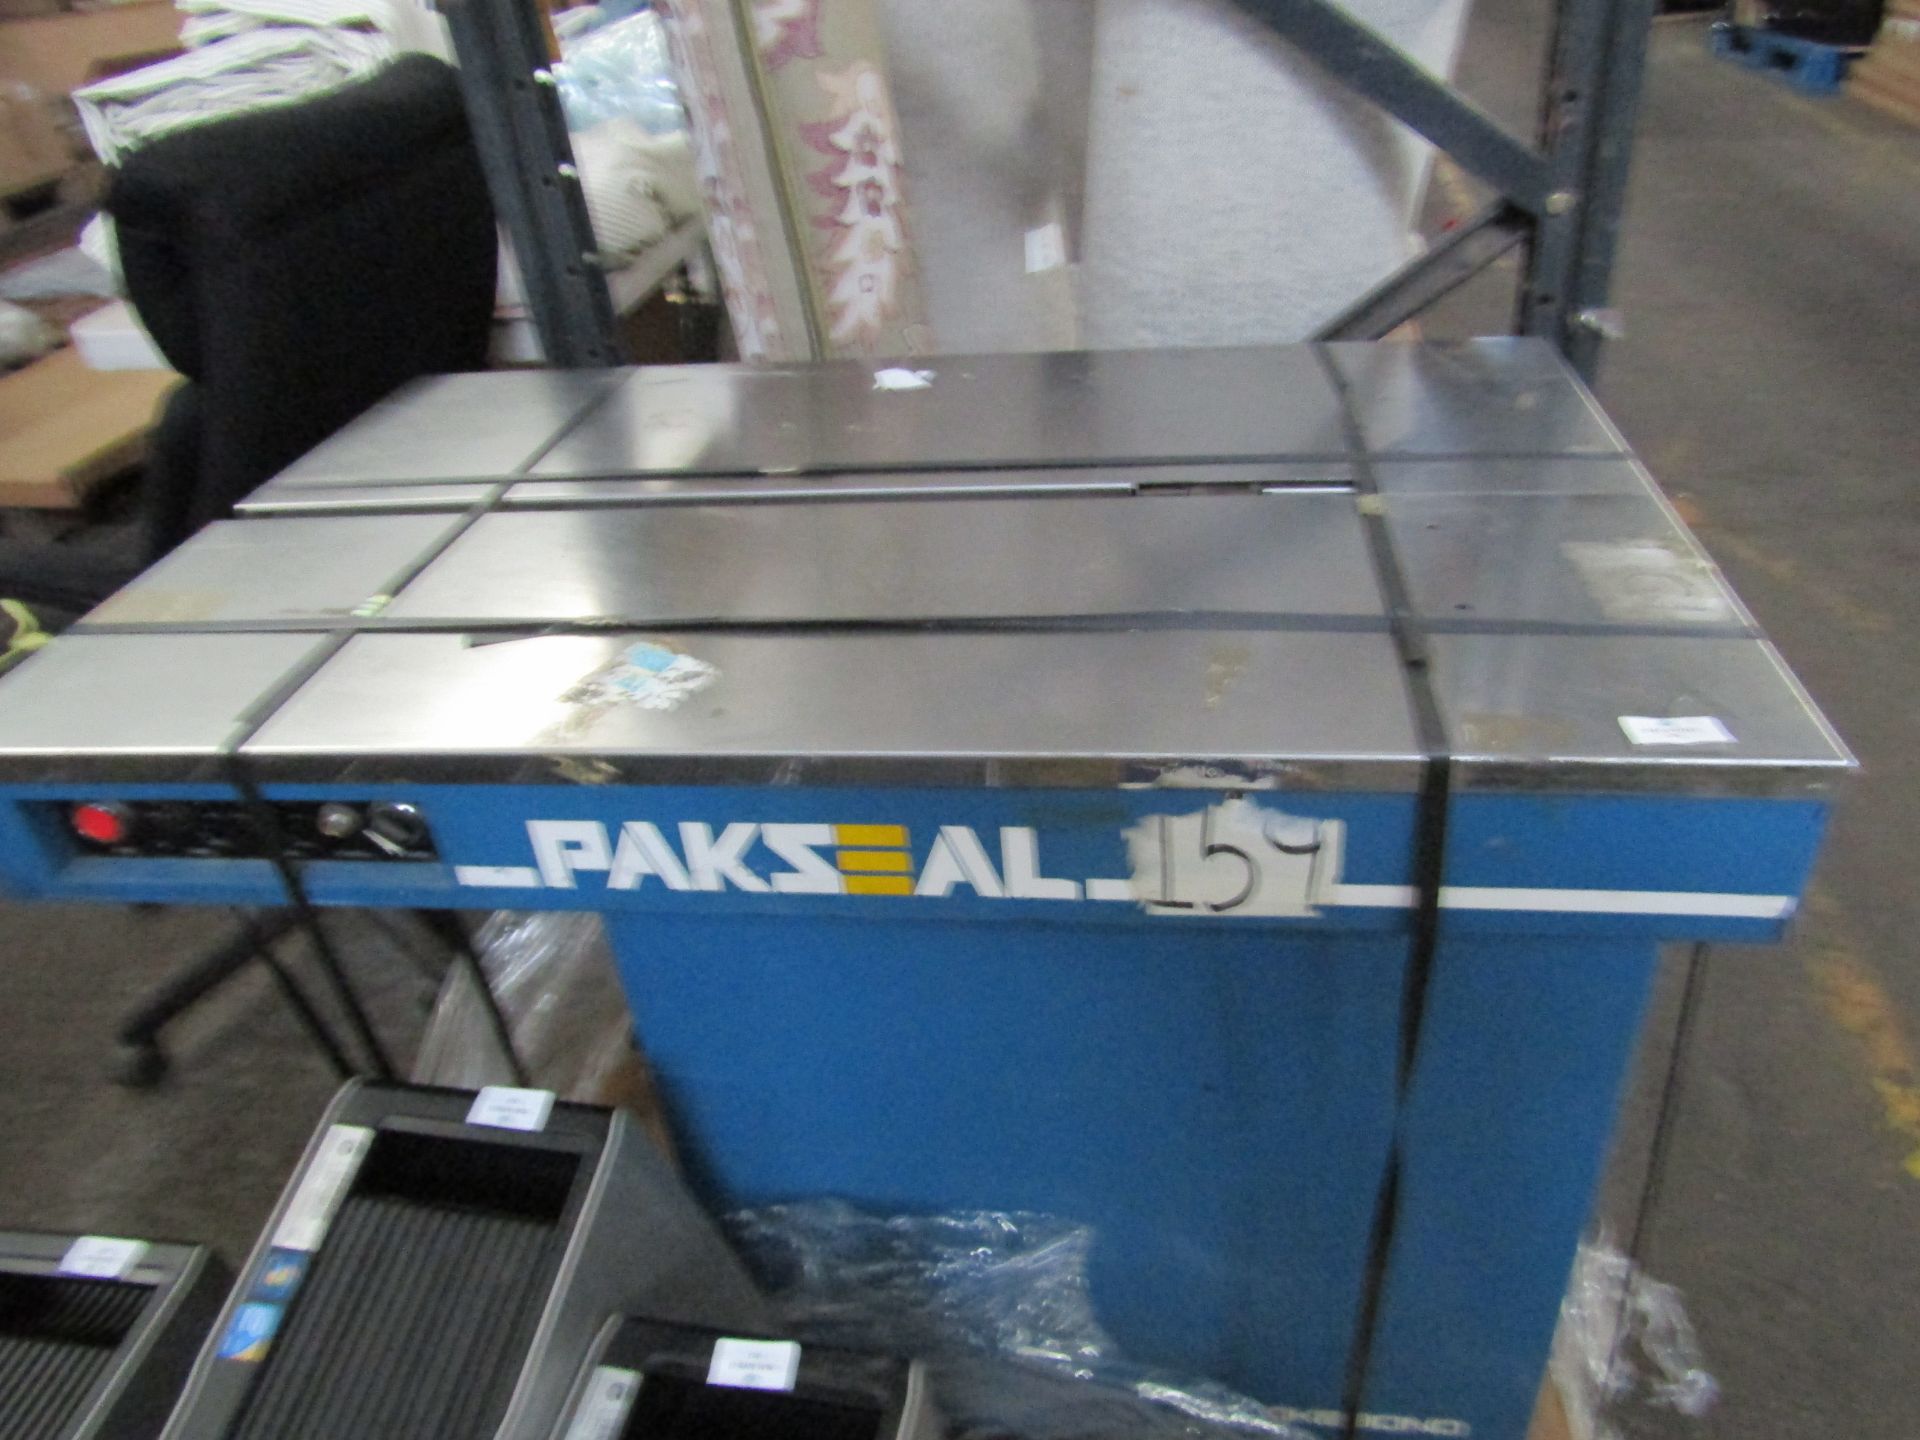 Paksesl table banding Machine, working with a roll of banding already in it. - Image 3 of 4